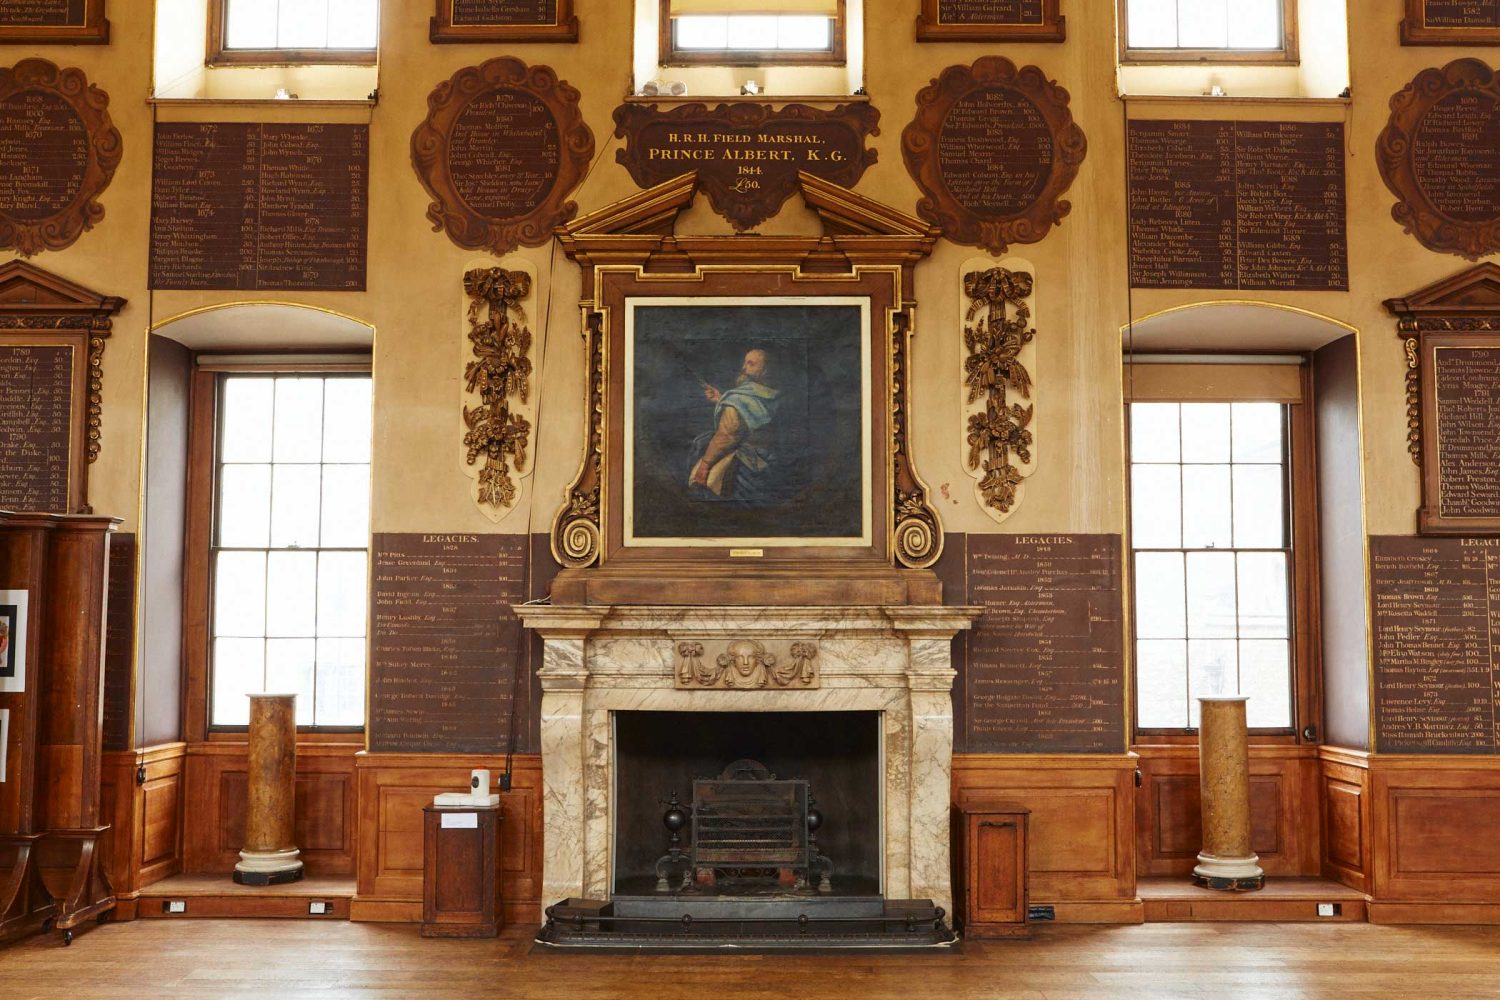 Portrait of St Bartholomew over the fireplace in the Great Hall